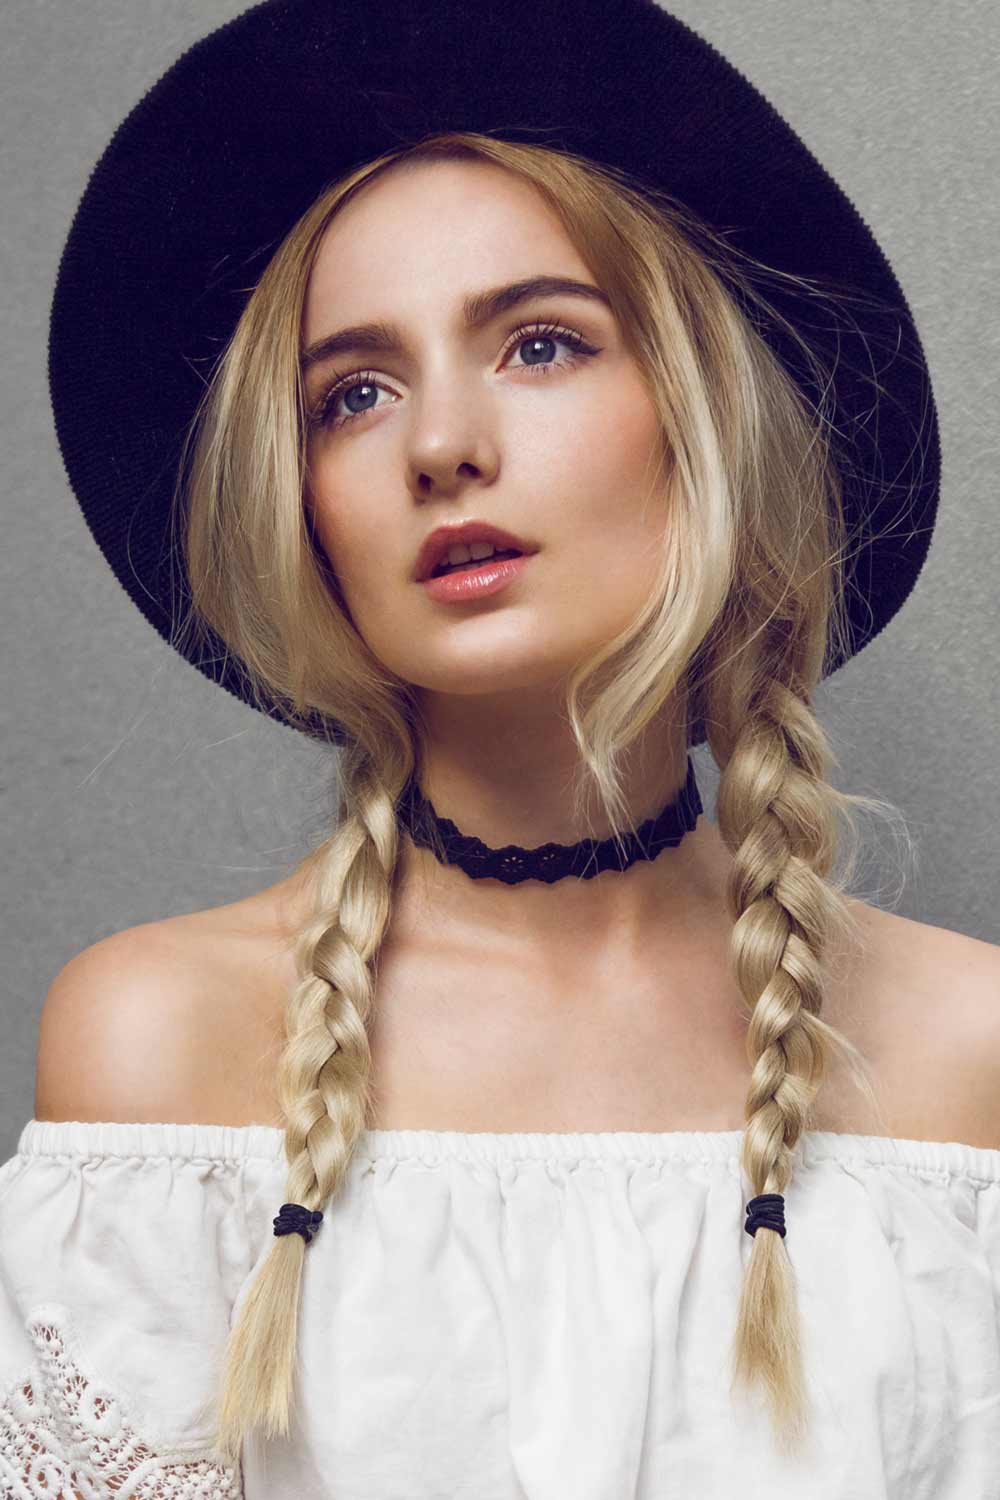 Side Braids with a Hat Hairstyle